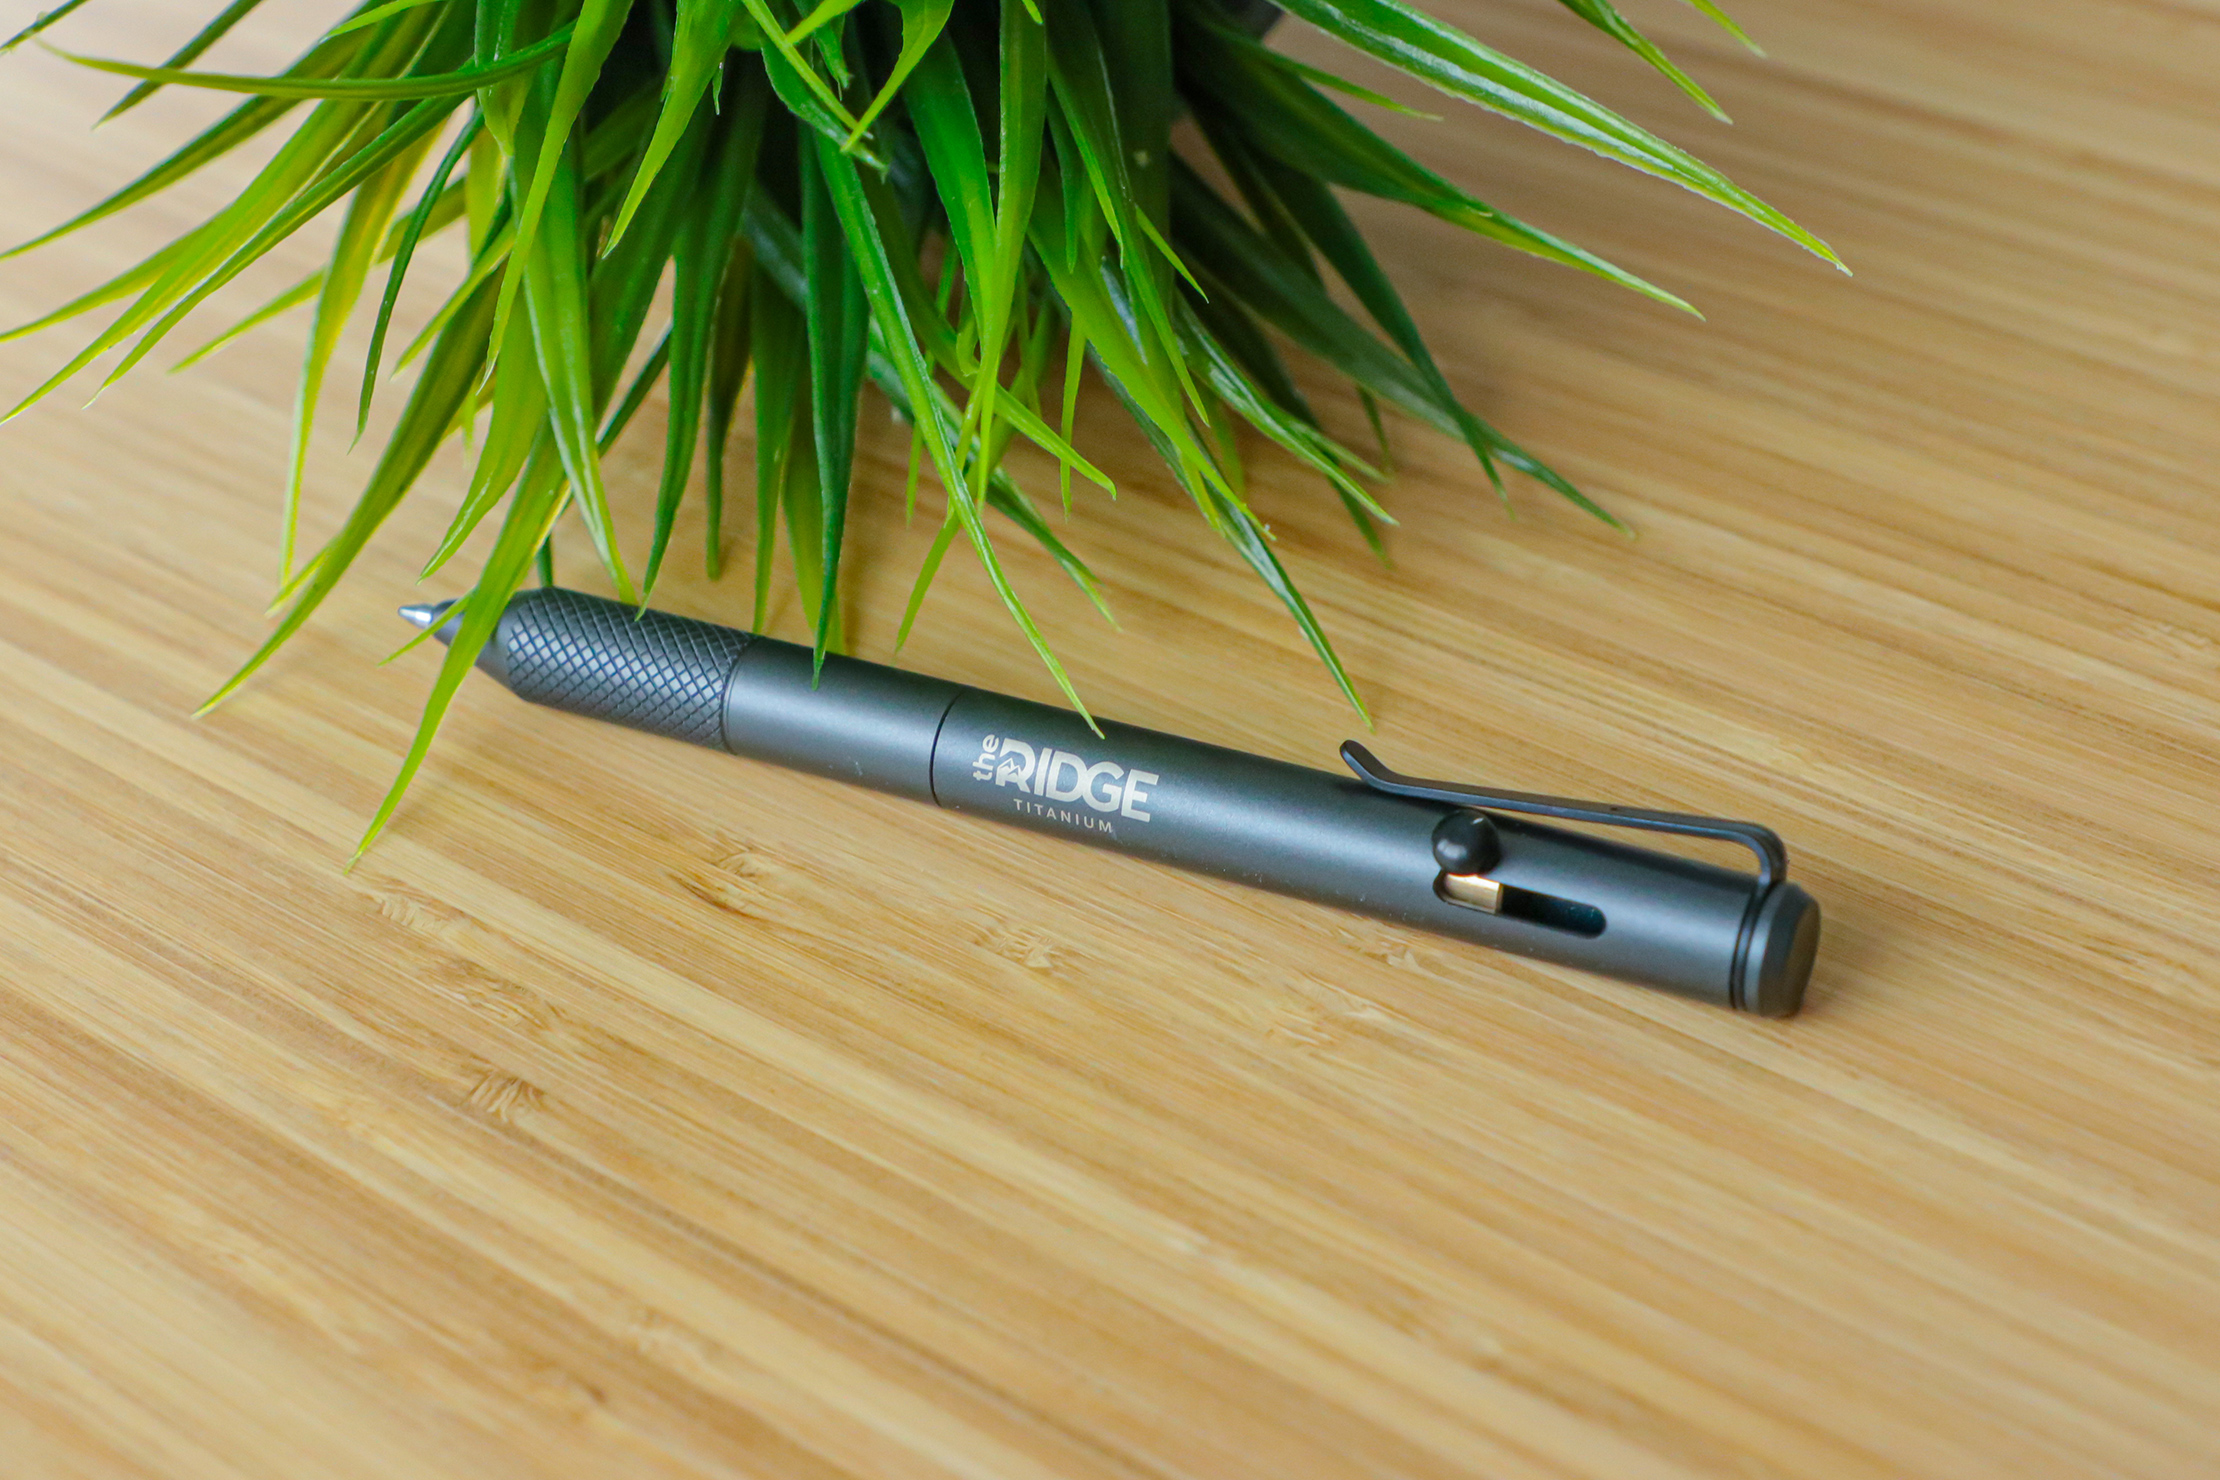 Ti Pocket Pro Pen Takes Just About Any Kind of Refill